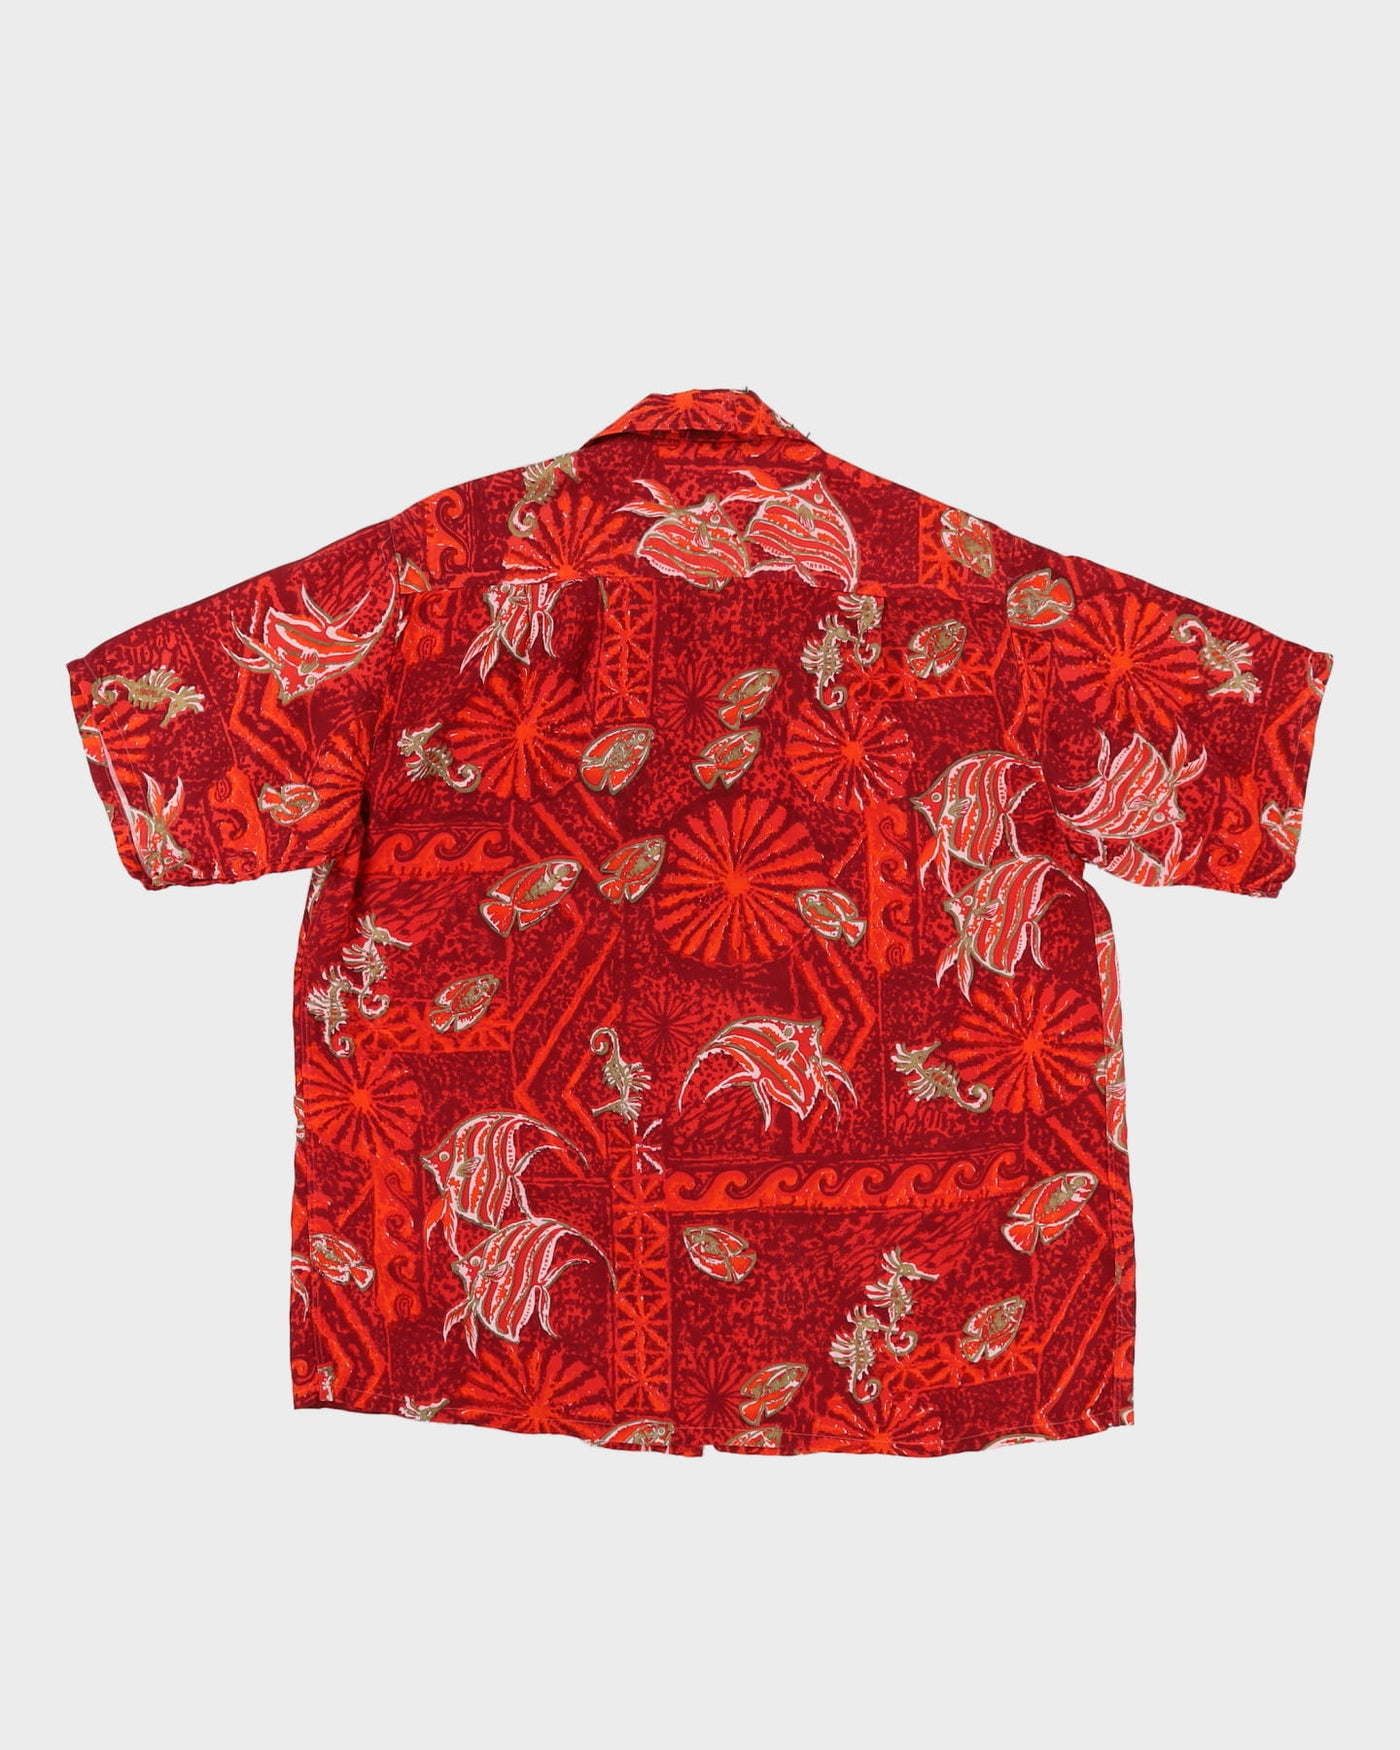 60s Red Fish Patterned Button Up Short-Sleeve Hawaiian Shirt - L